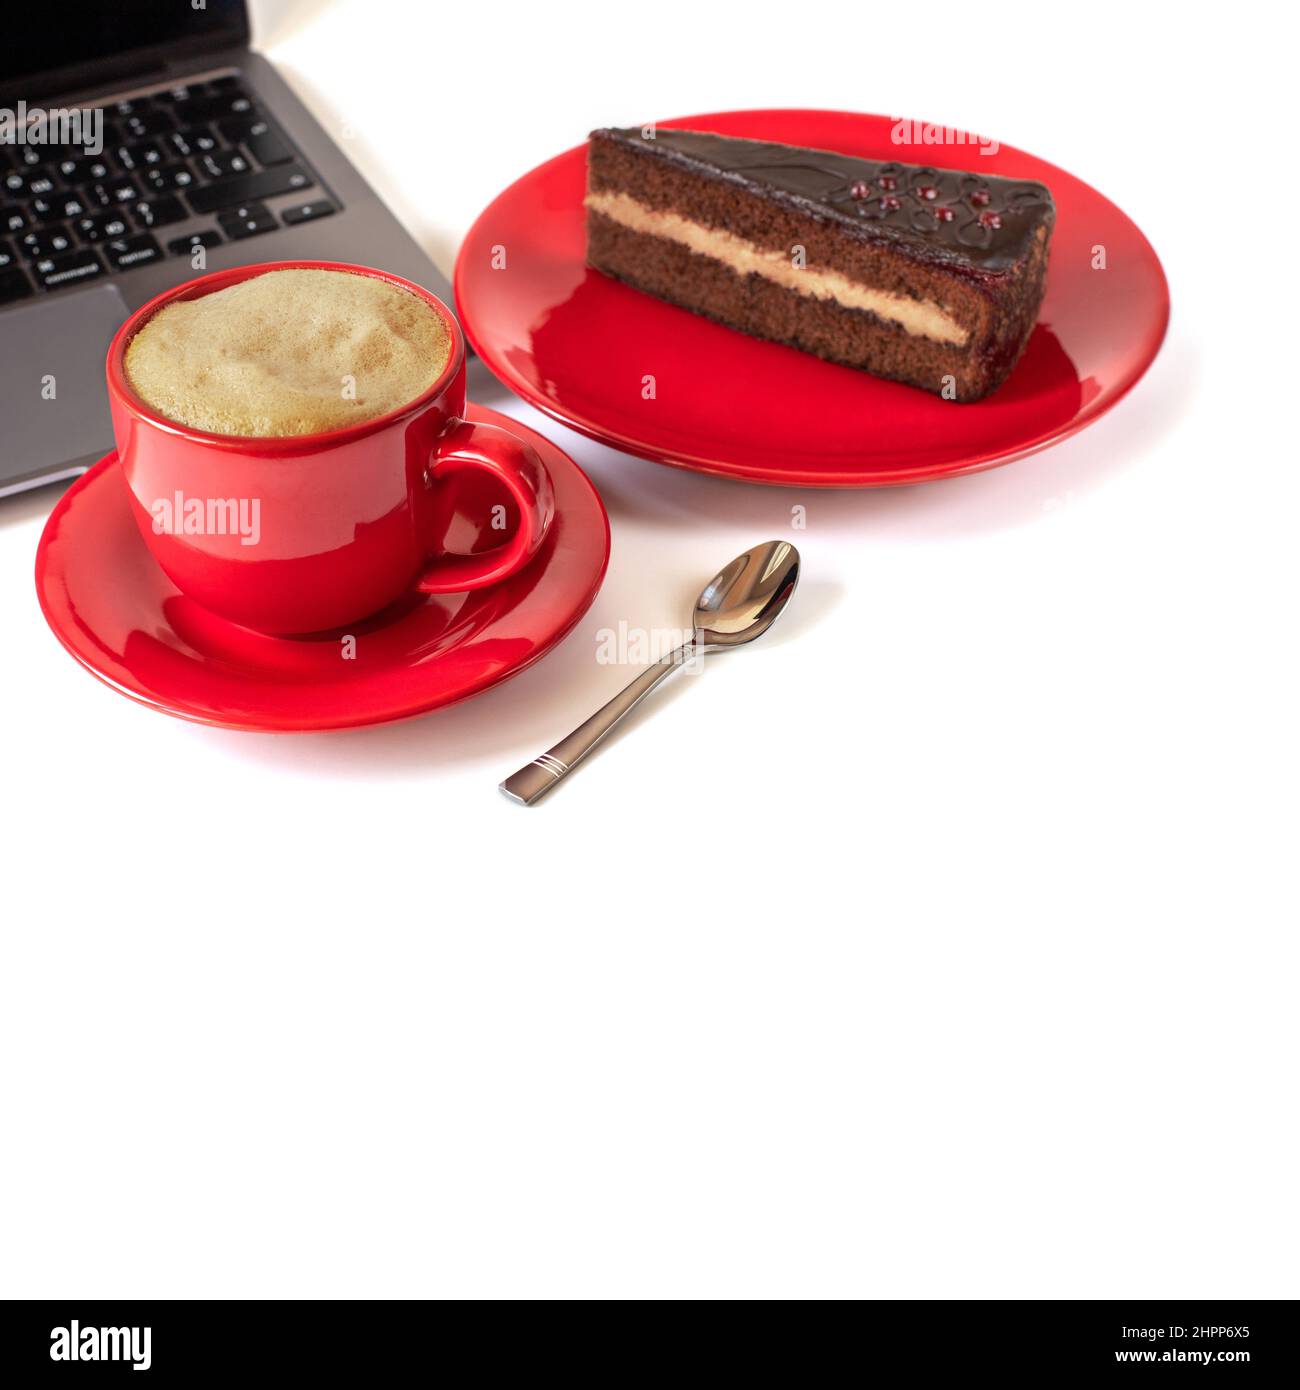 On the table is a cup of coffee with foam, a cake on a saucer and a laptop. Selective focus. Isolate Stock Photo